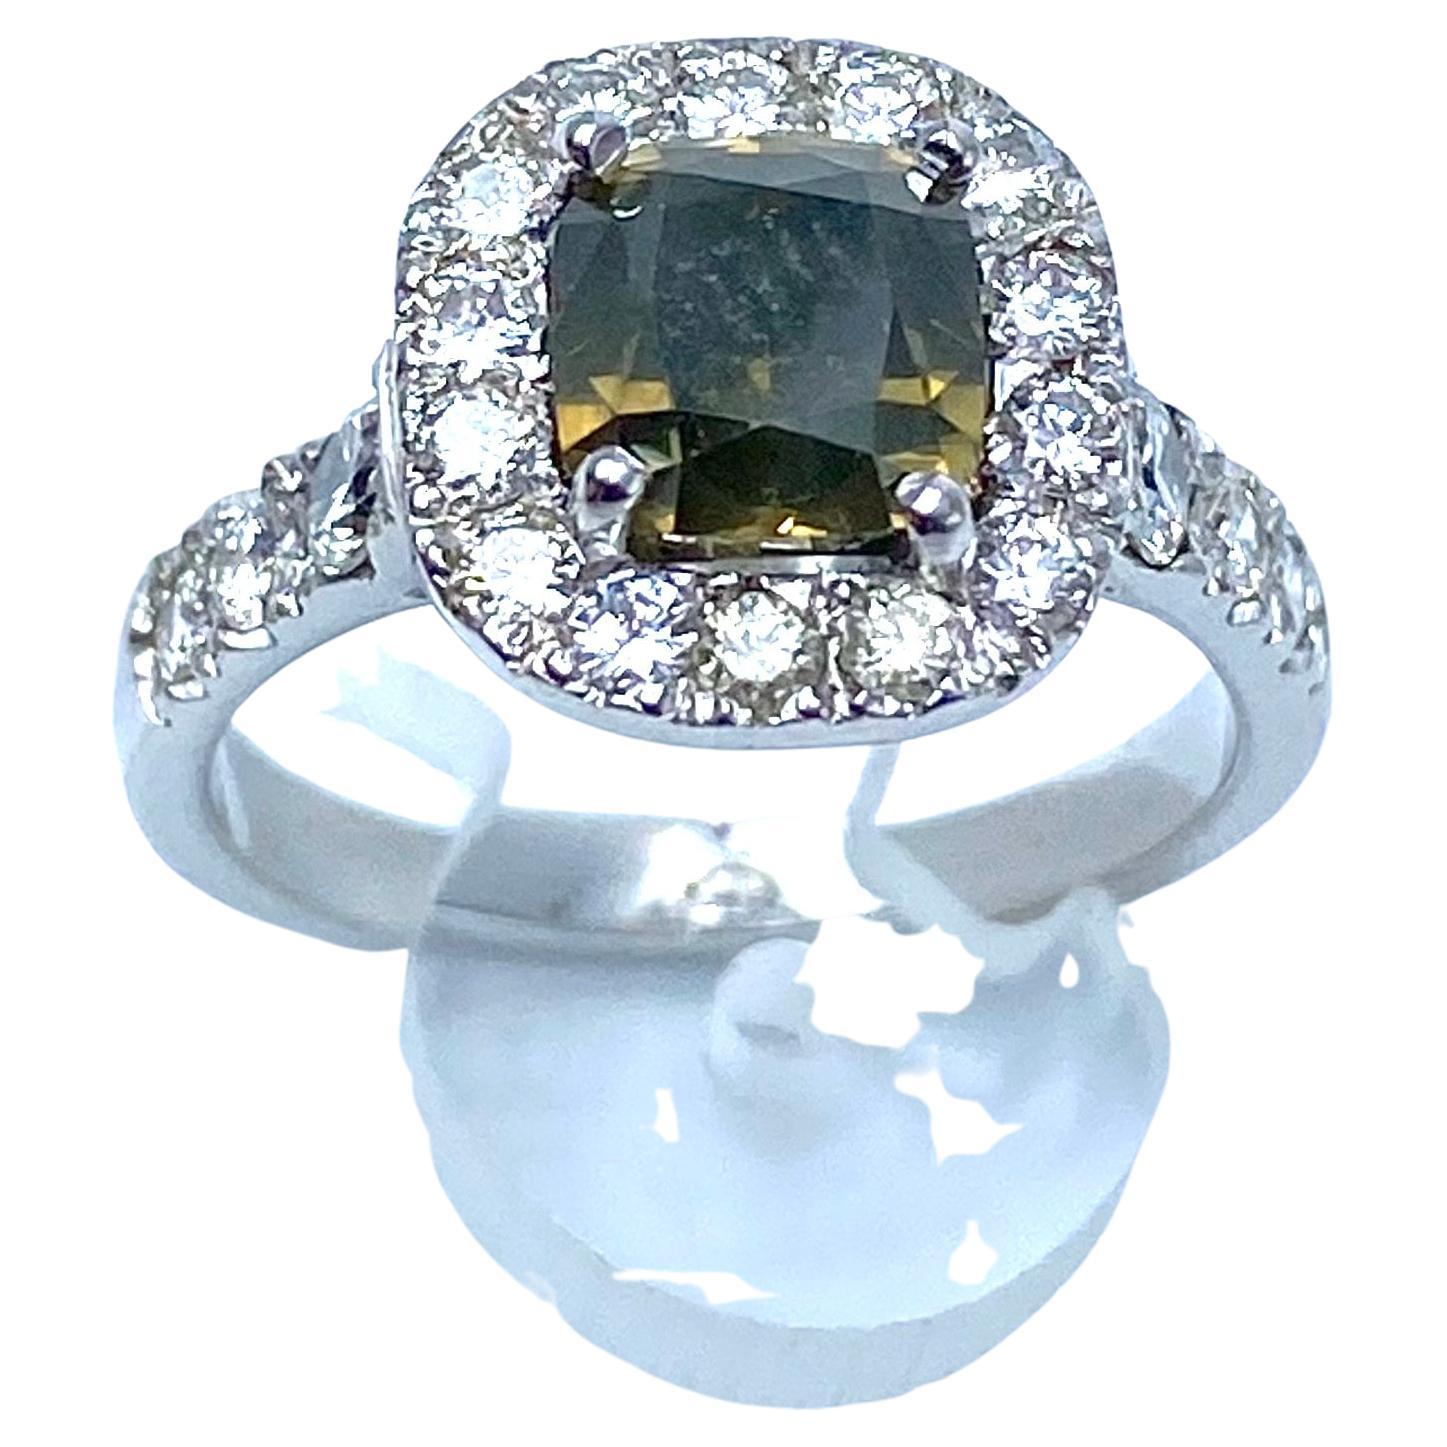 Refined ring bearing a fancy natural diamond described in the certificate GIL DIA201709093739
Size: 6.46 x 6.22 x 5.43 mm
Clarity: SI1
Treatment: untreated
Carats: 2.14 ct
Color: natural yellowish dark fancy green
Cutting pillow
Origin